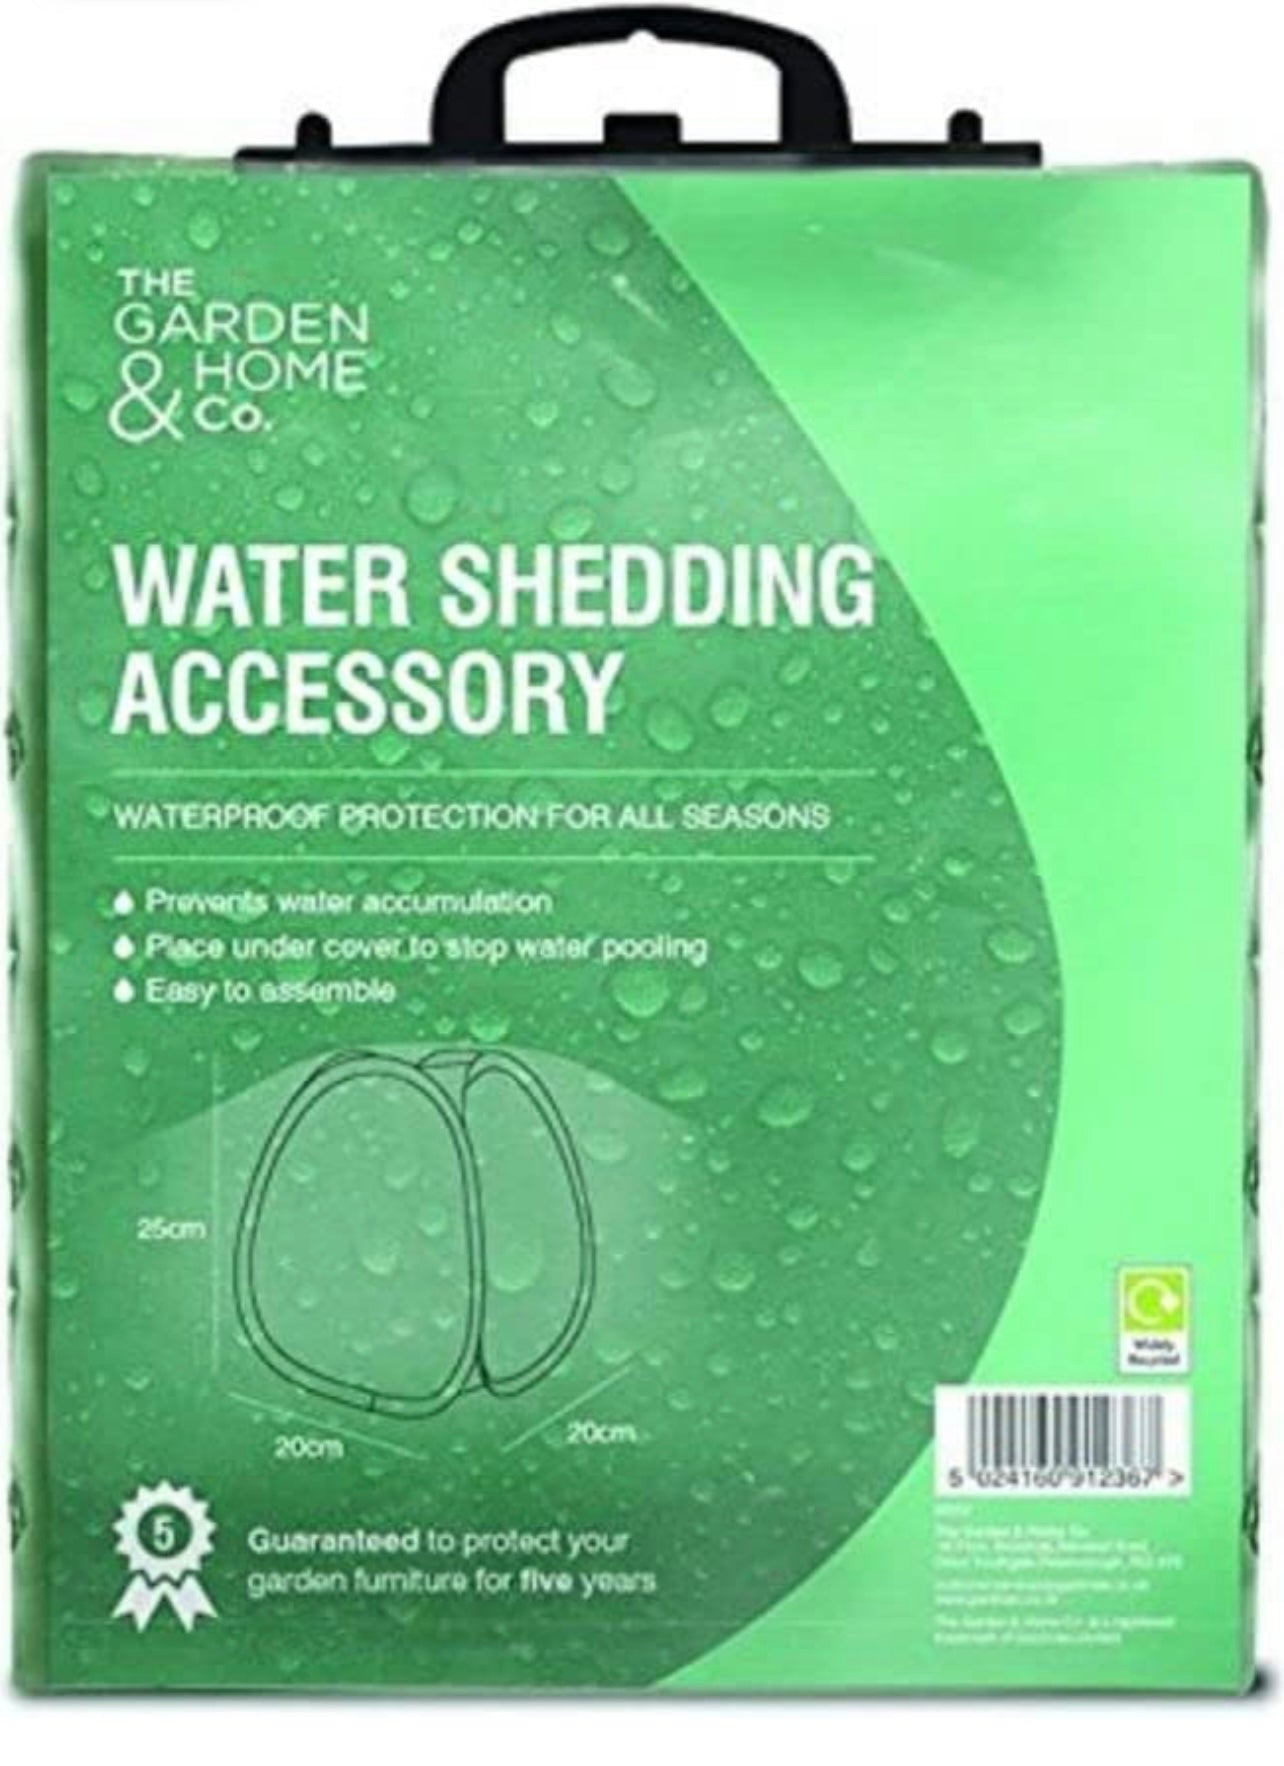 Water Shedder Accessory